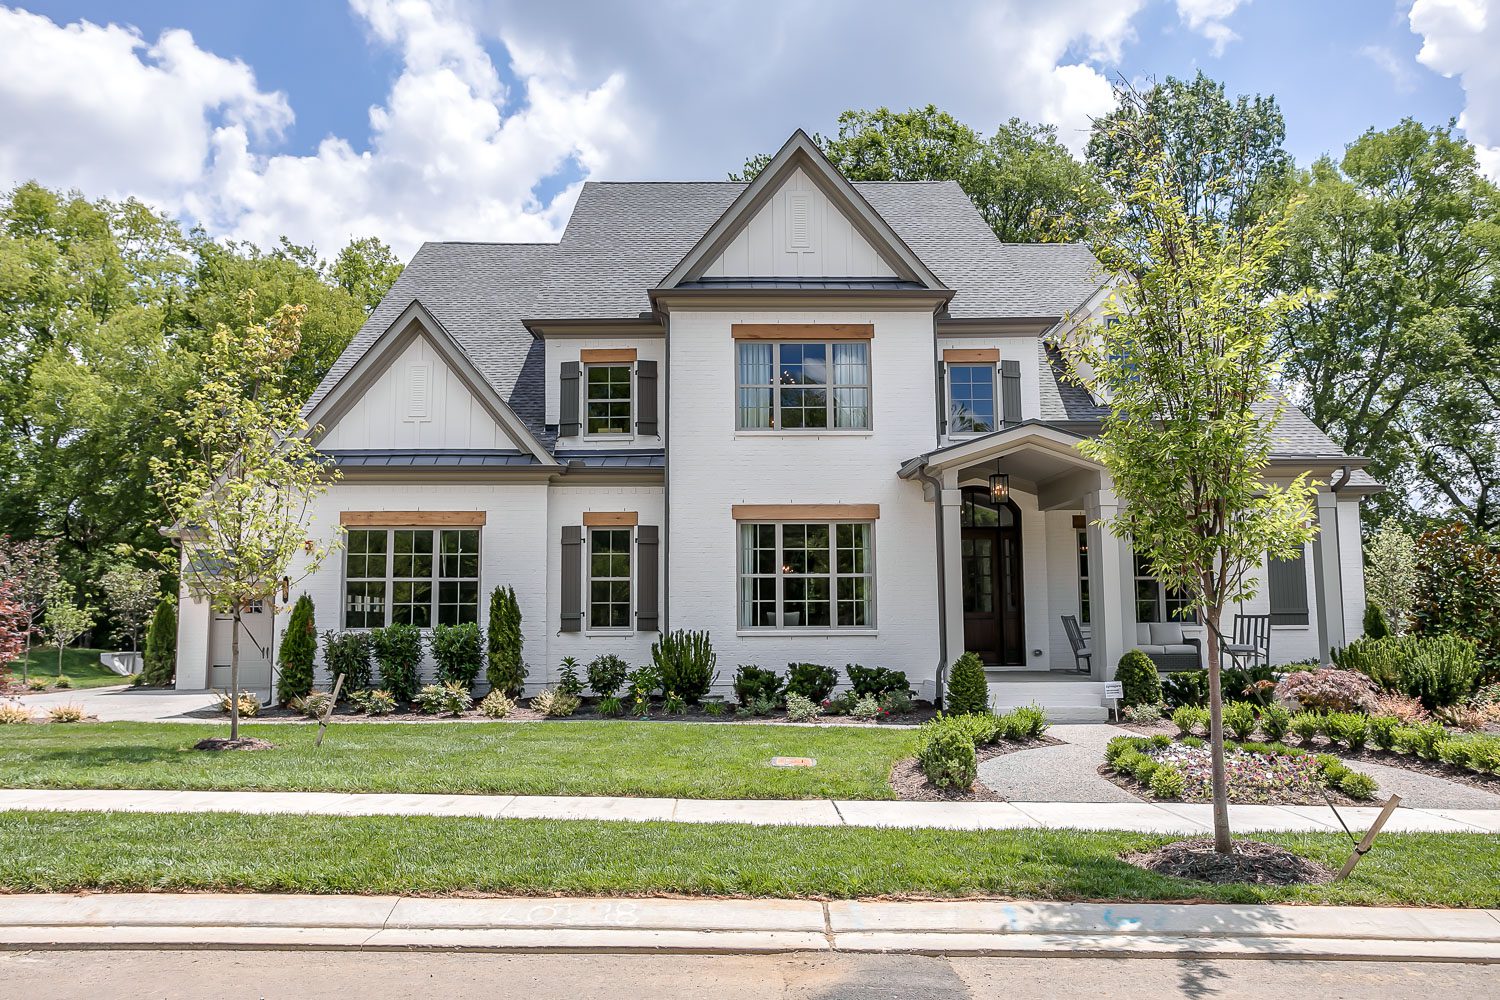 Luxury homes built by Turnberry Homes, a Premier Builder of Luxury Dream Home Plans in Nashville TN